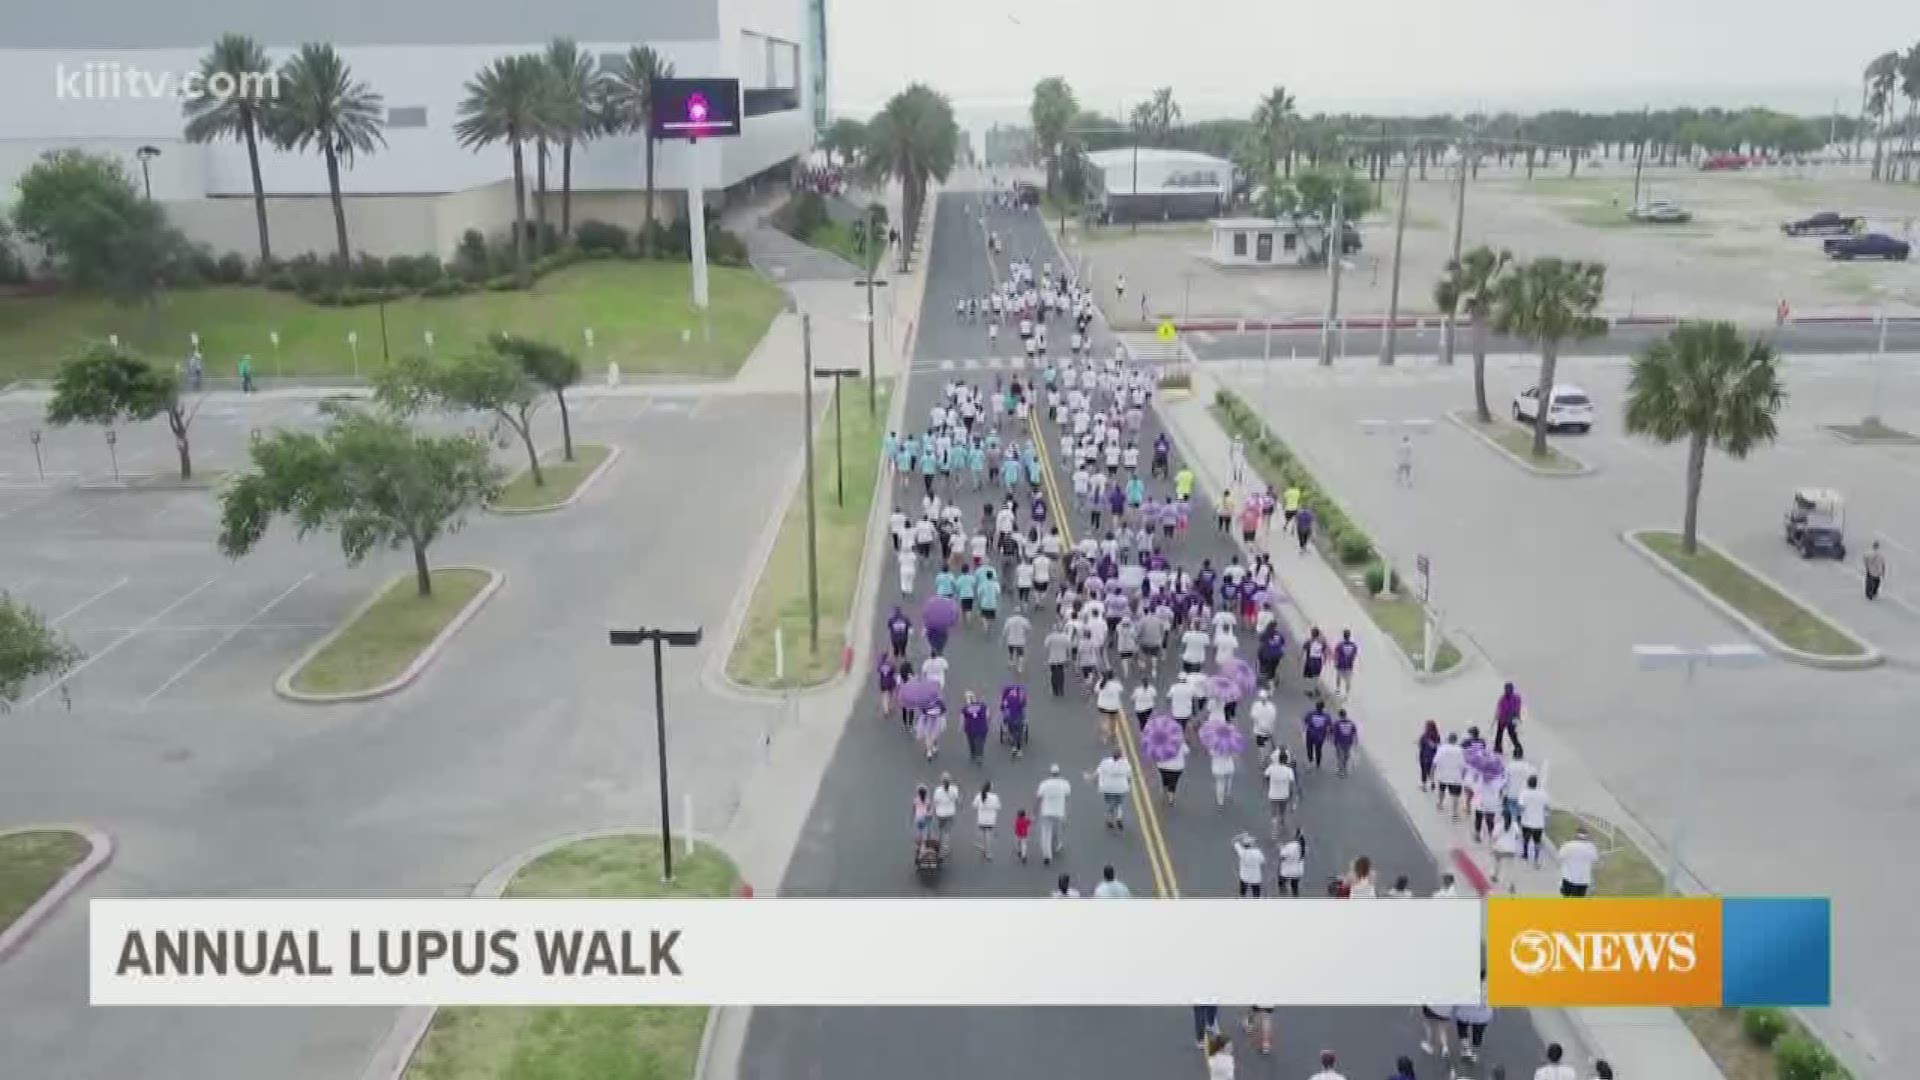 Join the walk on May 25th, raising awareness and funds to end Lupus.